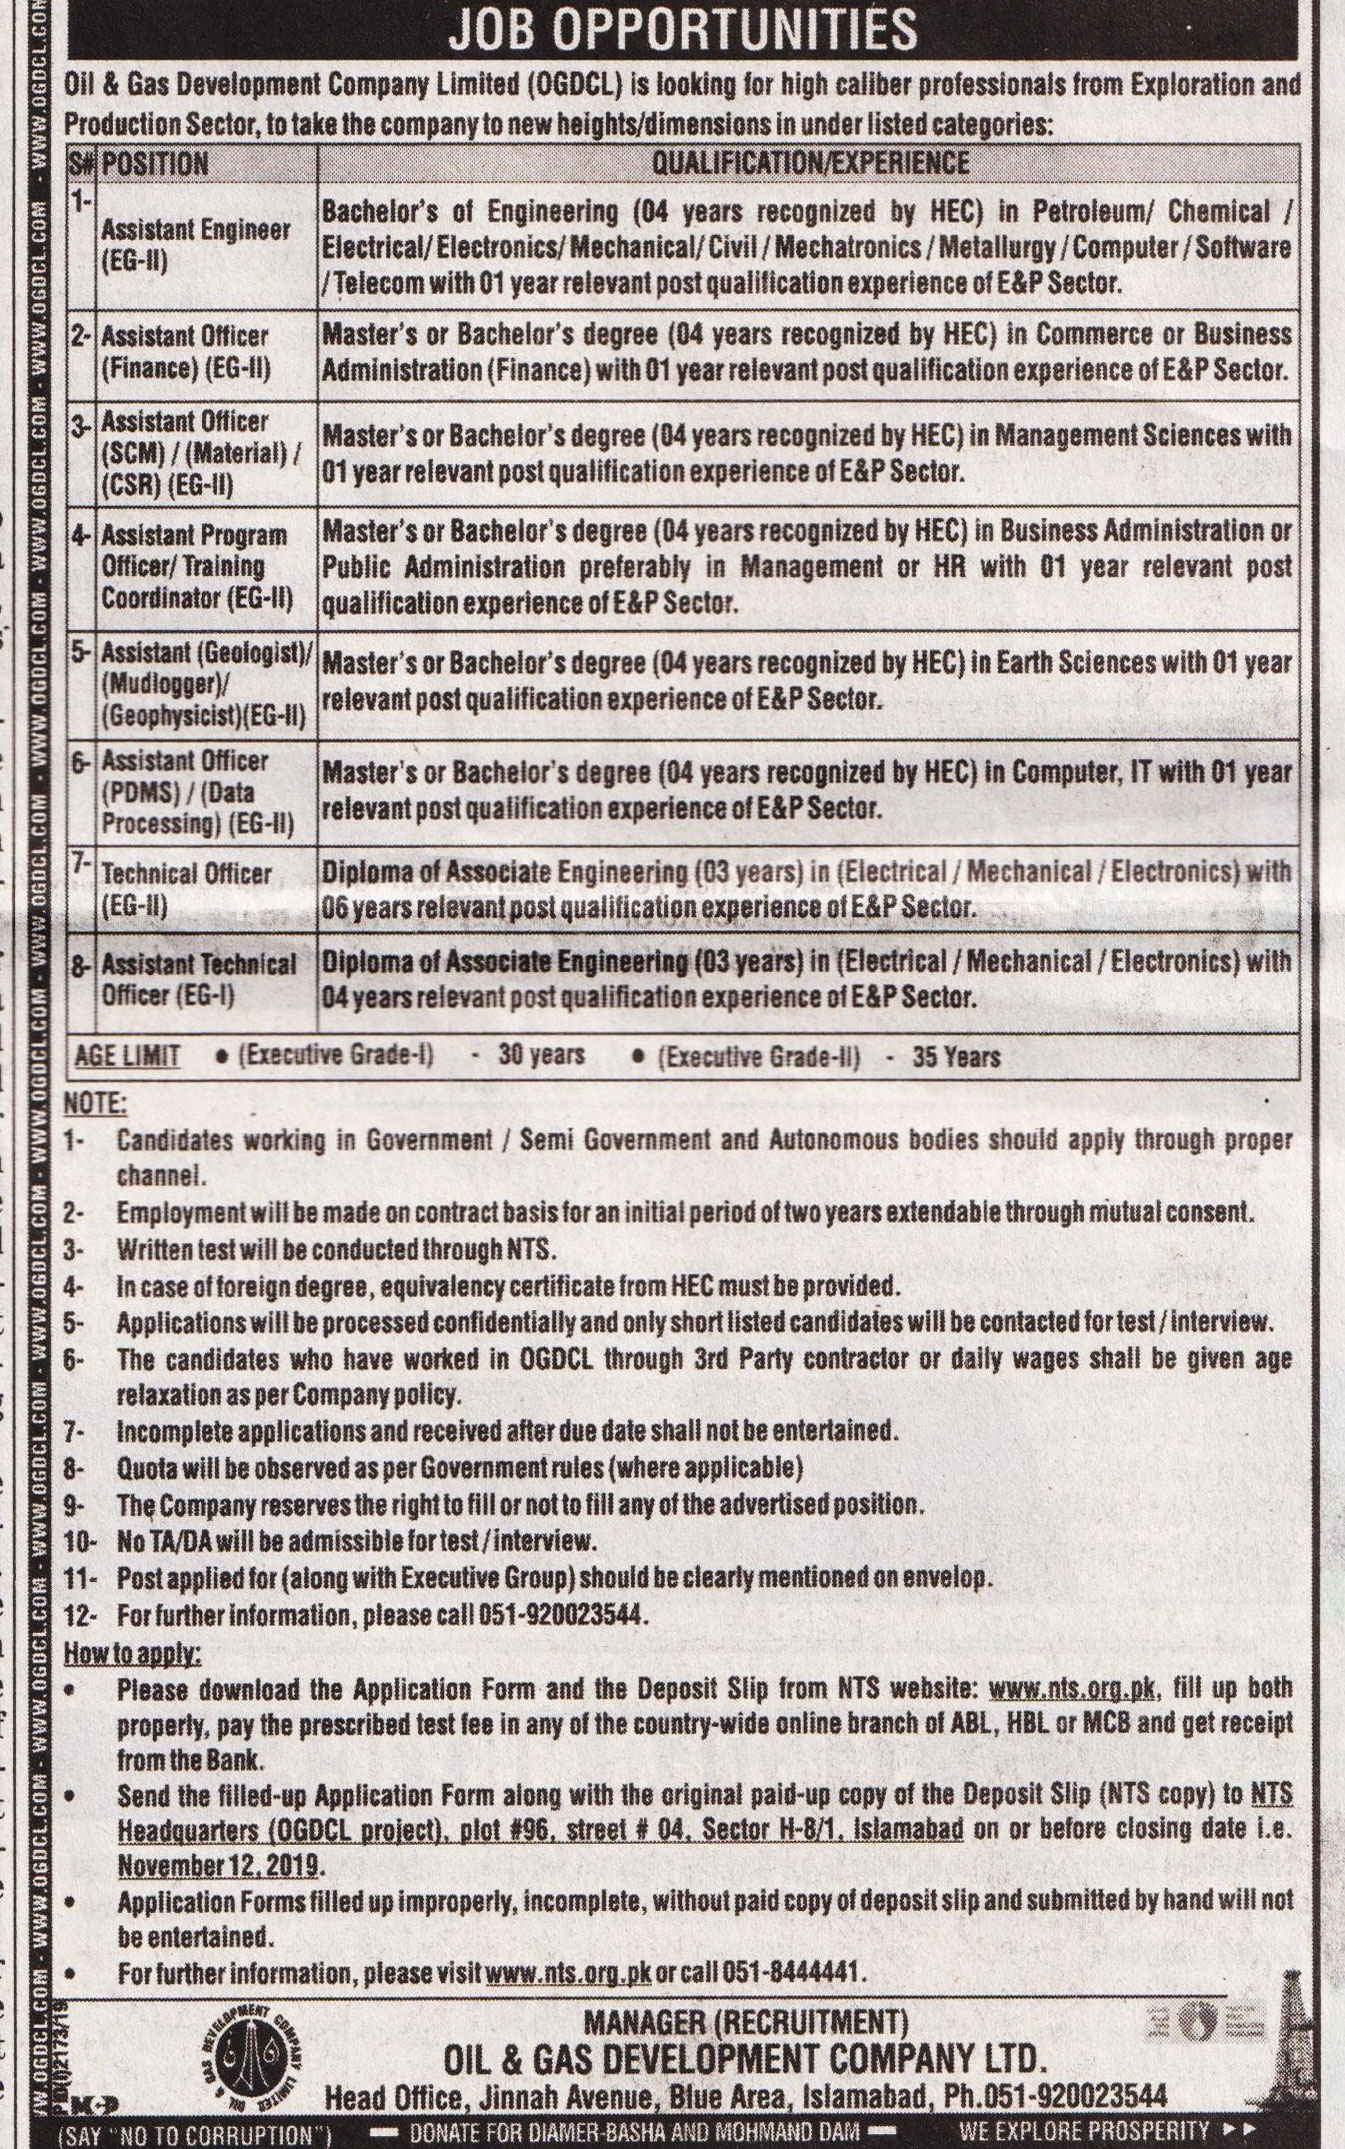 Oil & Gas Development Company Limited Offering Jobs In Islamabad